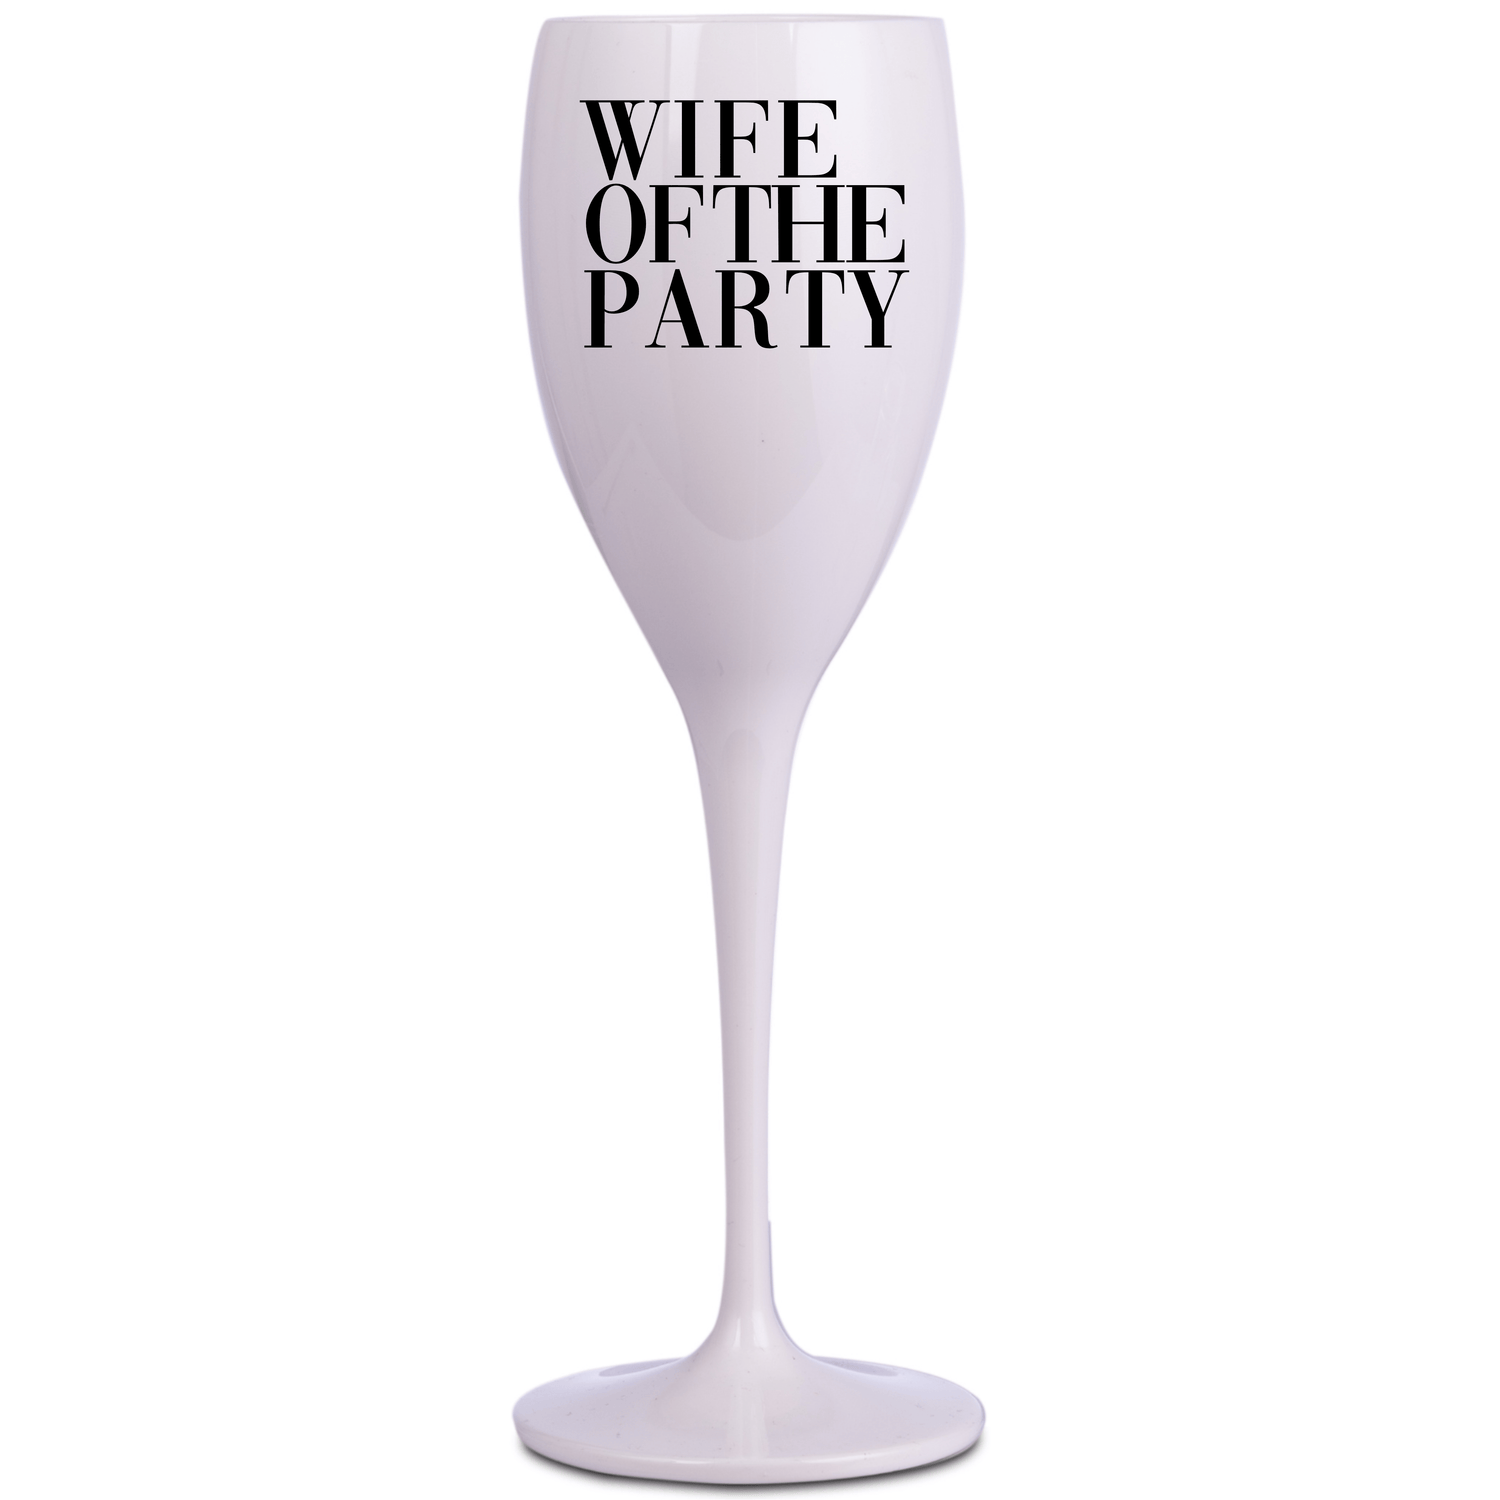 Wife of the Party - Findlay Rowe Designs